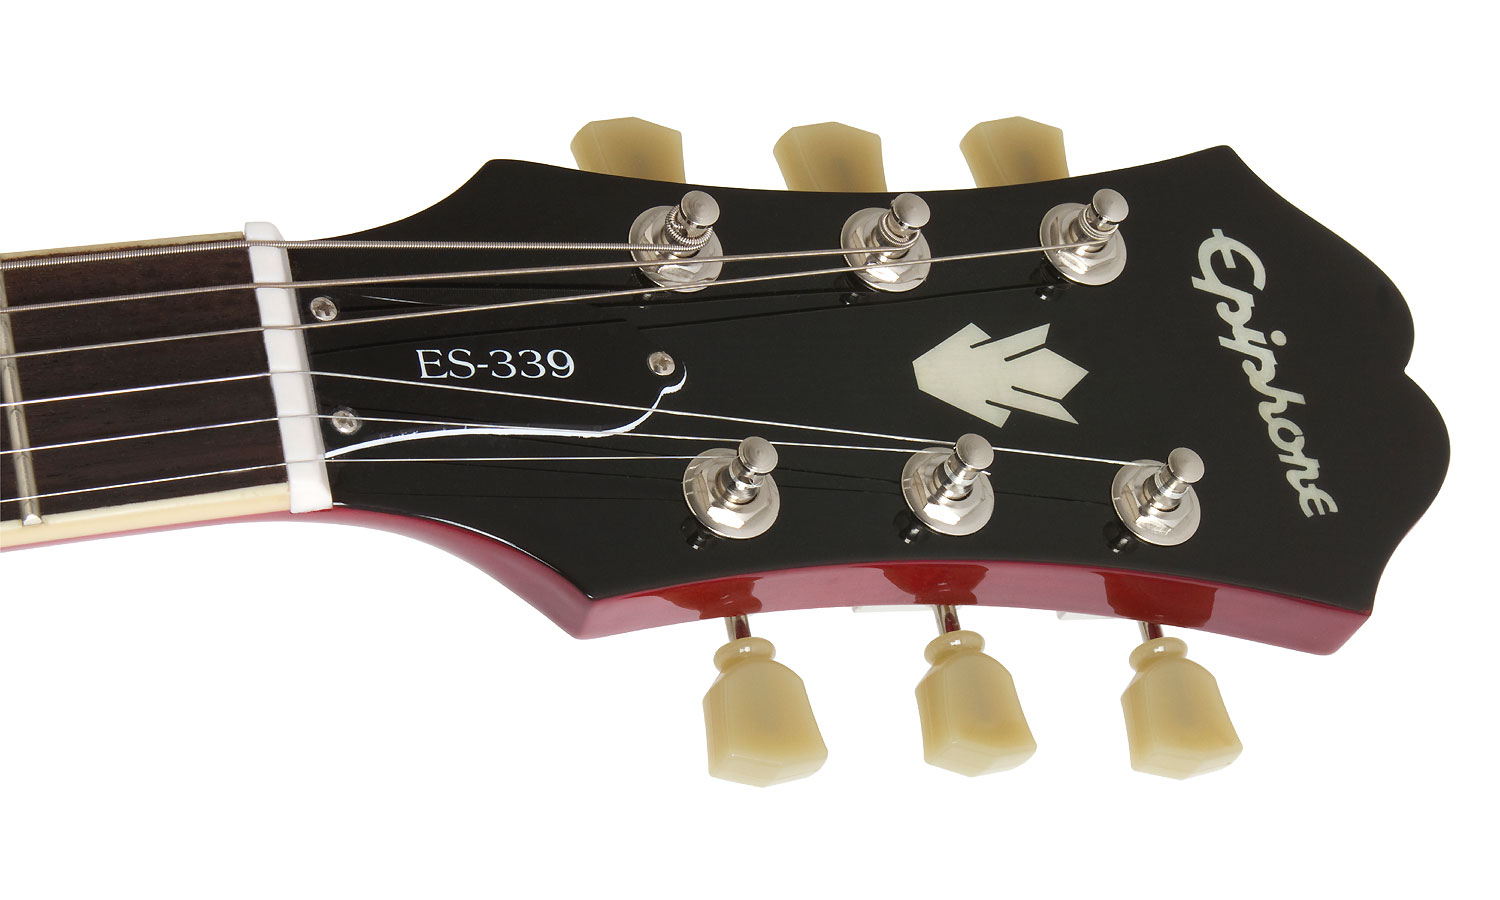 Epiphone Es-339 Inspired By Gibson 2020 2h Ht Rw - Cherry - Semi-hollow electric guitar - Variation 2